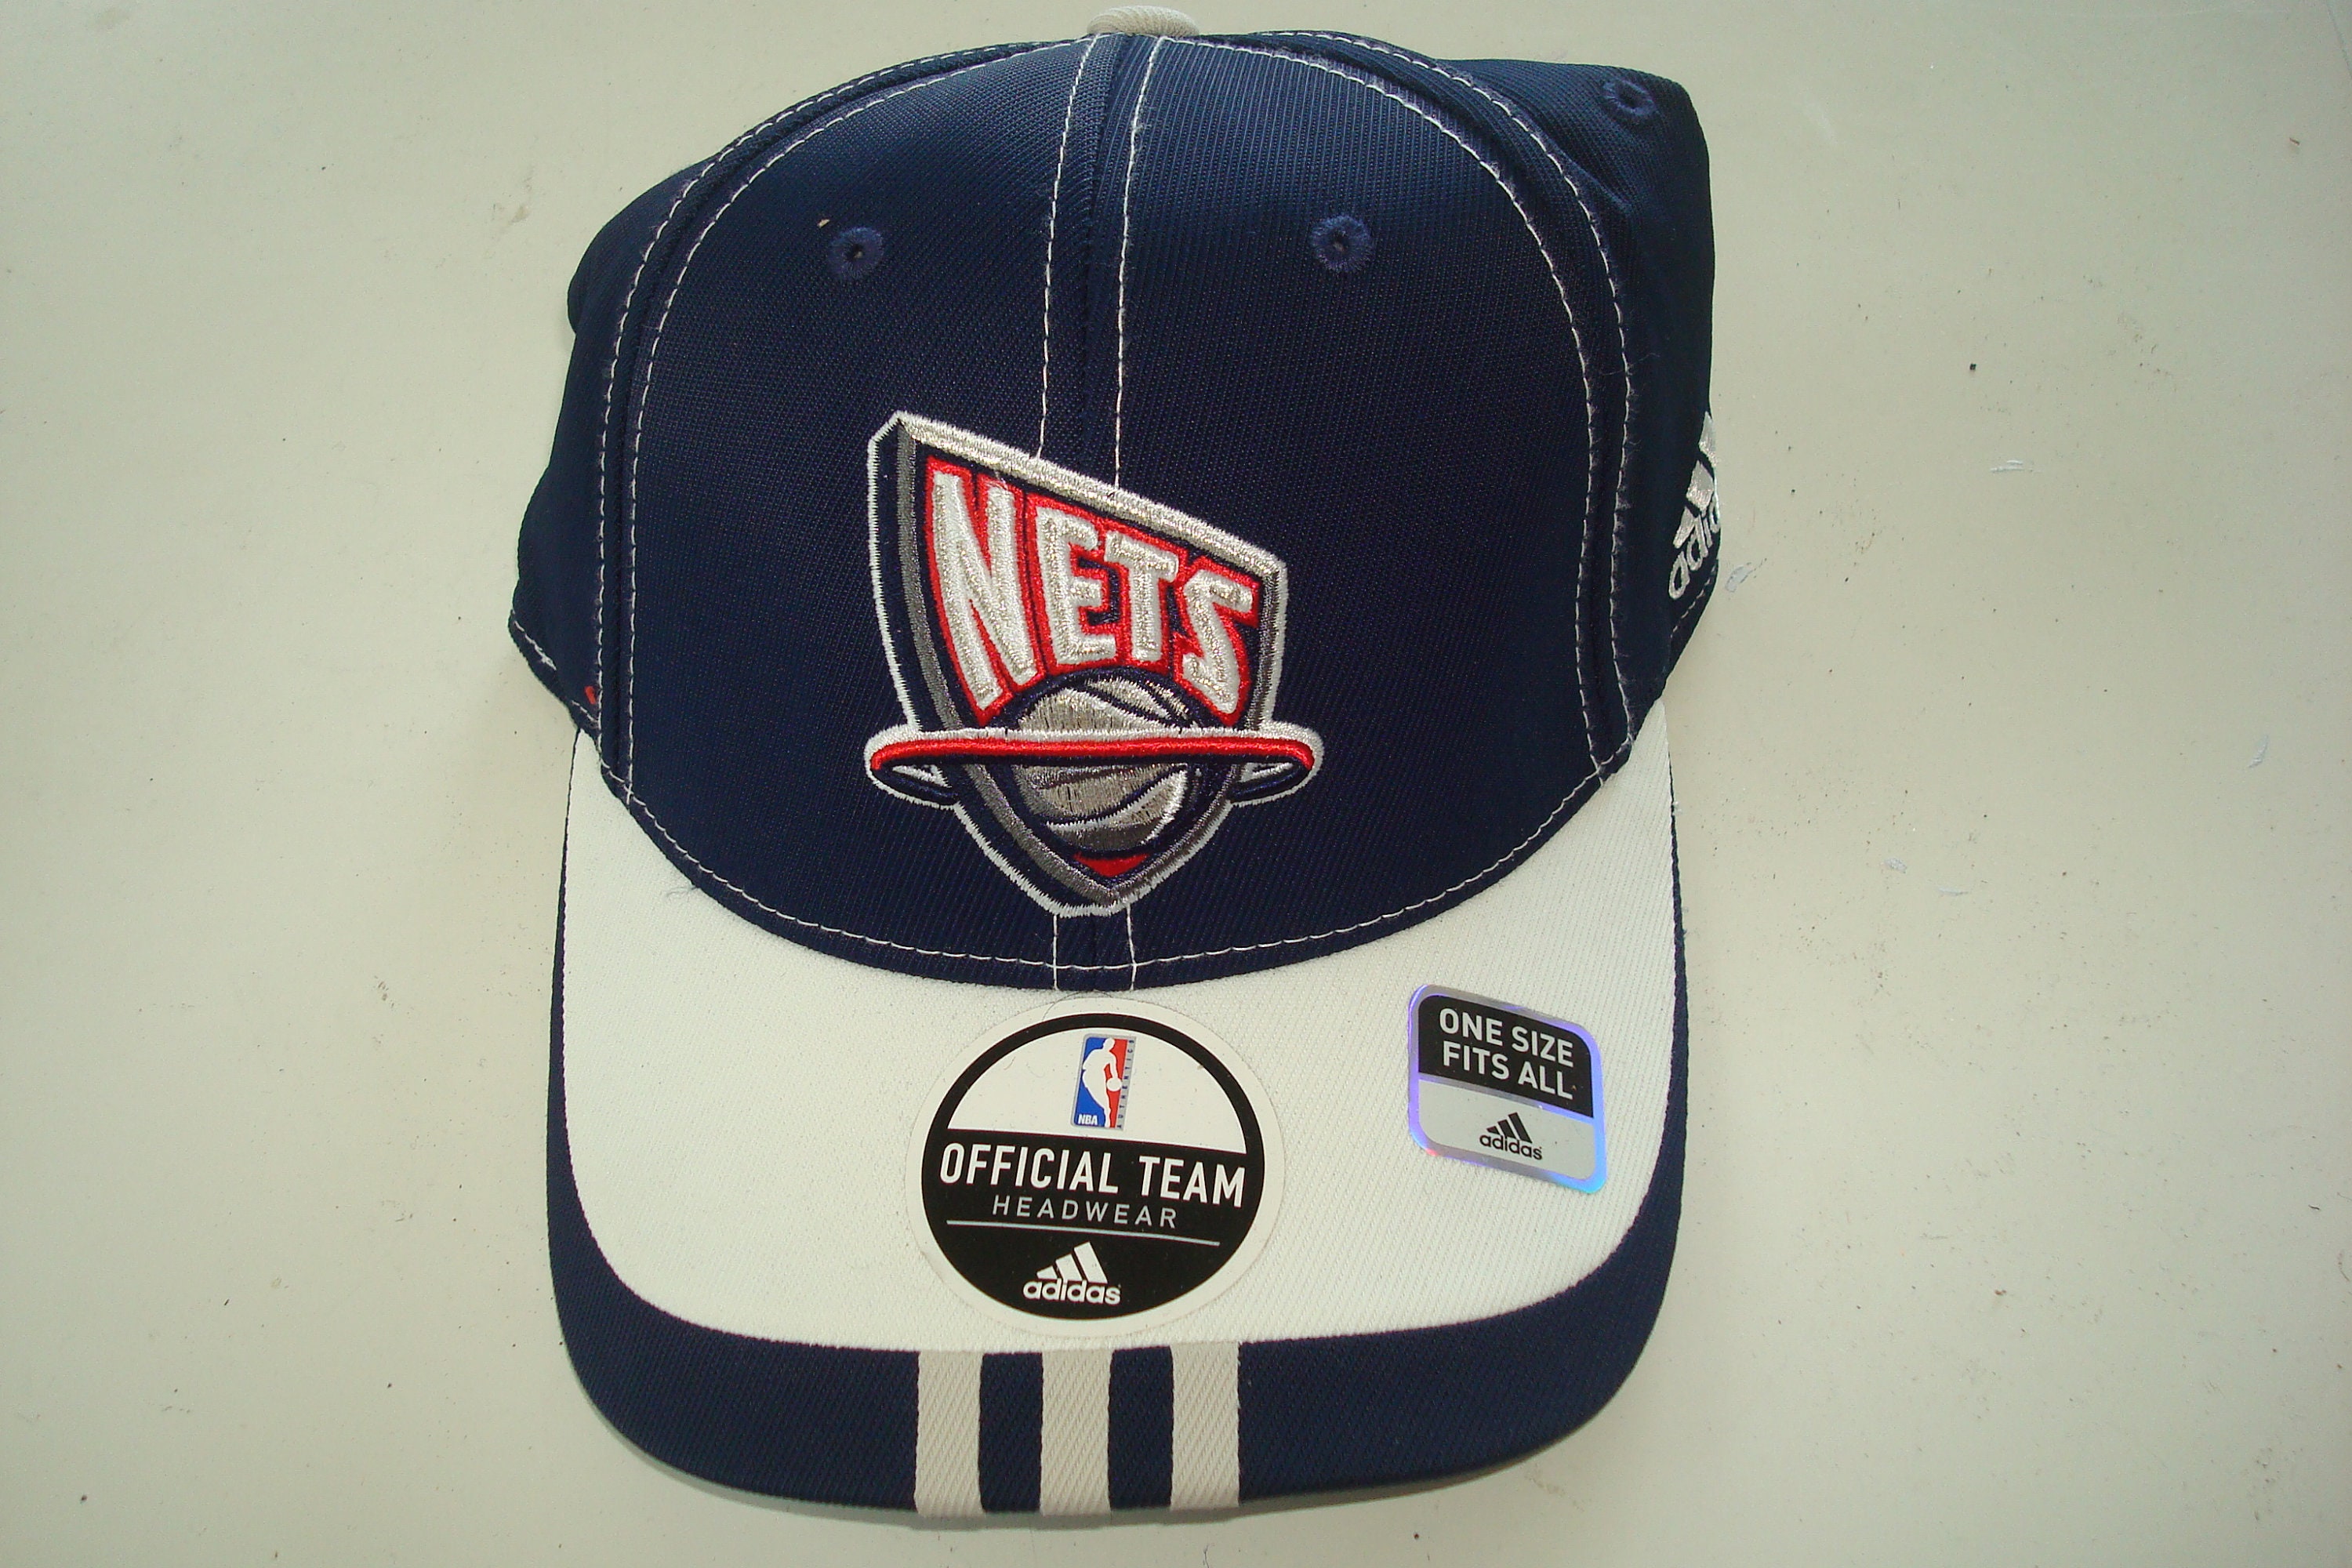 Vintage Starter New Jersey Nets Fitted Hat — Roots